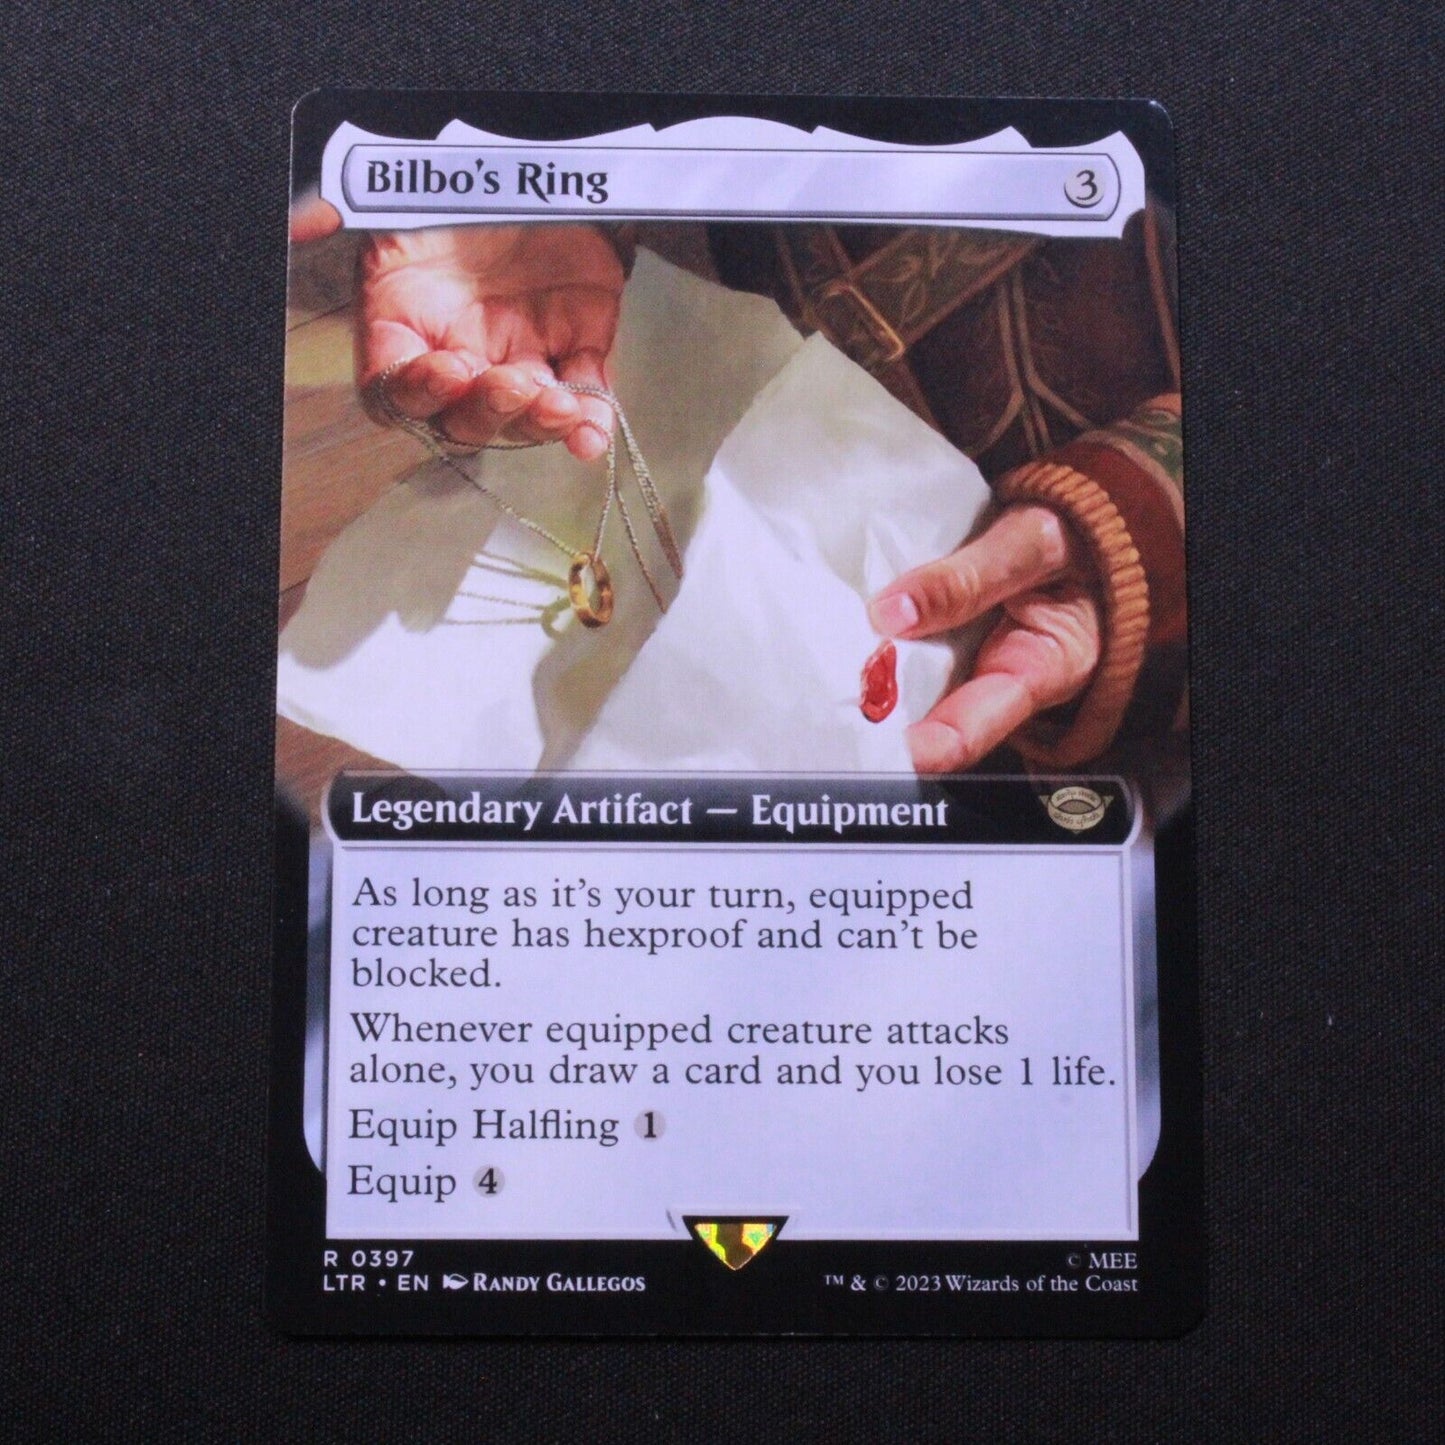 MTG The Lord of the Rings (LTR) Rare Bilbo's Ring (Extended Art) 397 NM